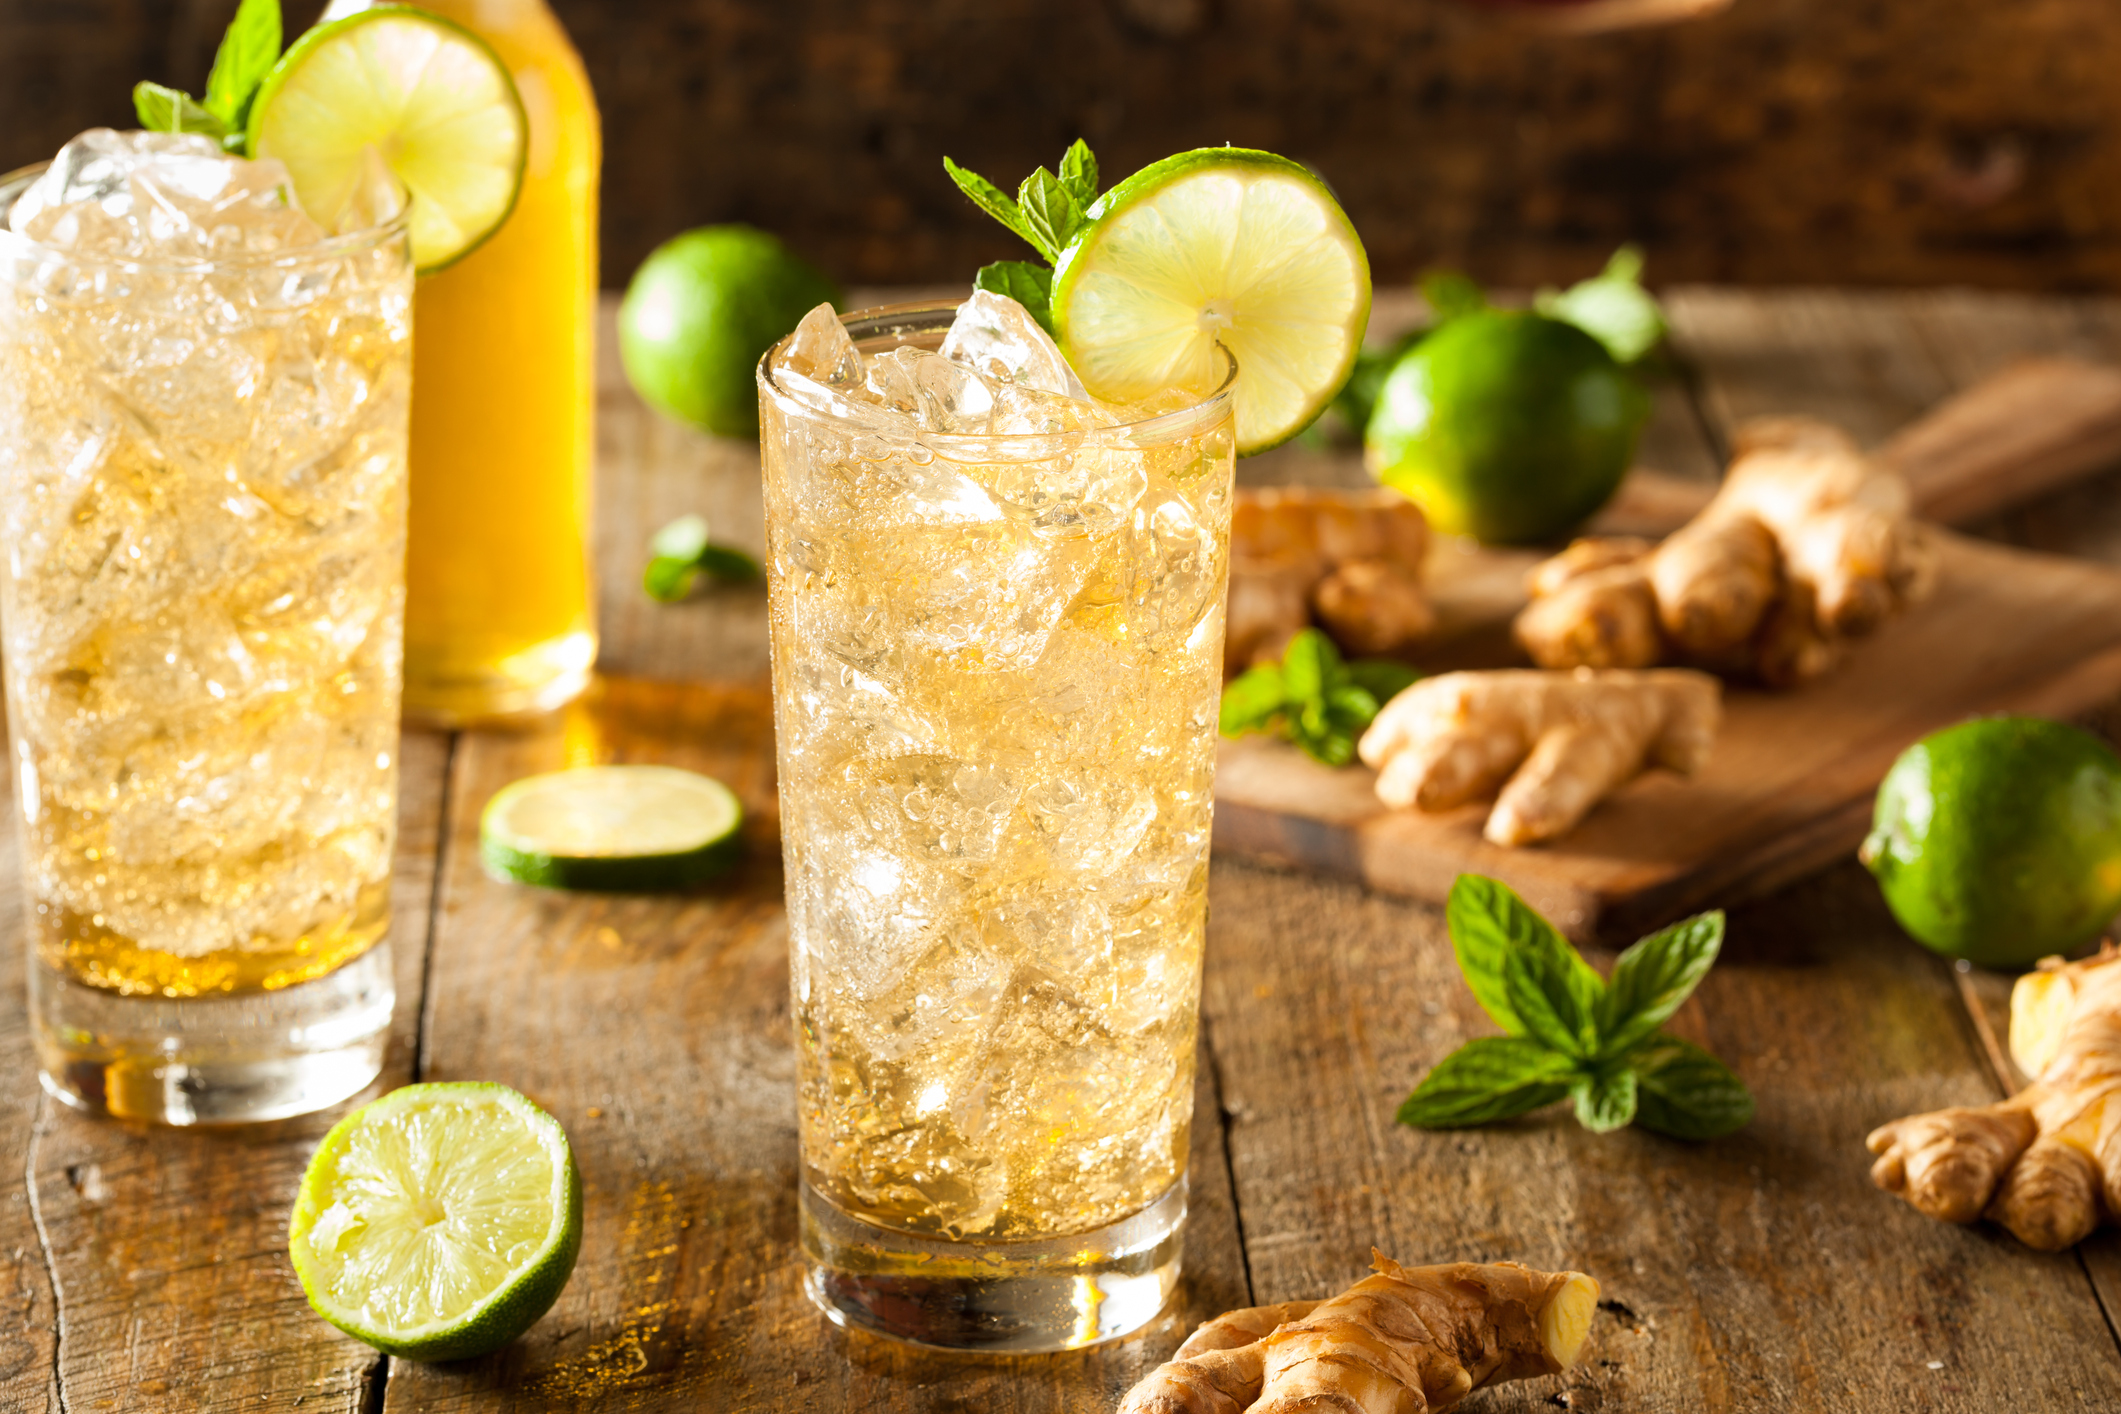 Recipe: Refreshing Golden Ginger Beer with Lime and Mint